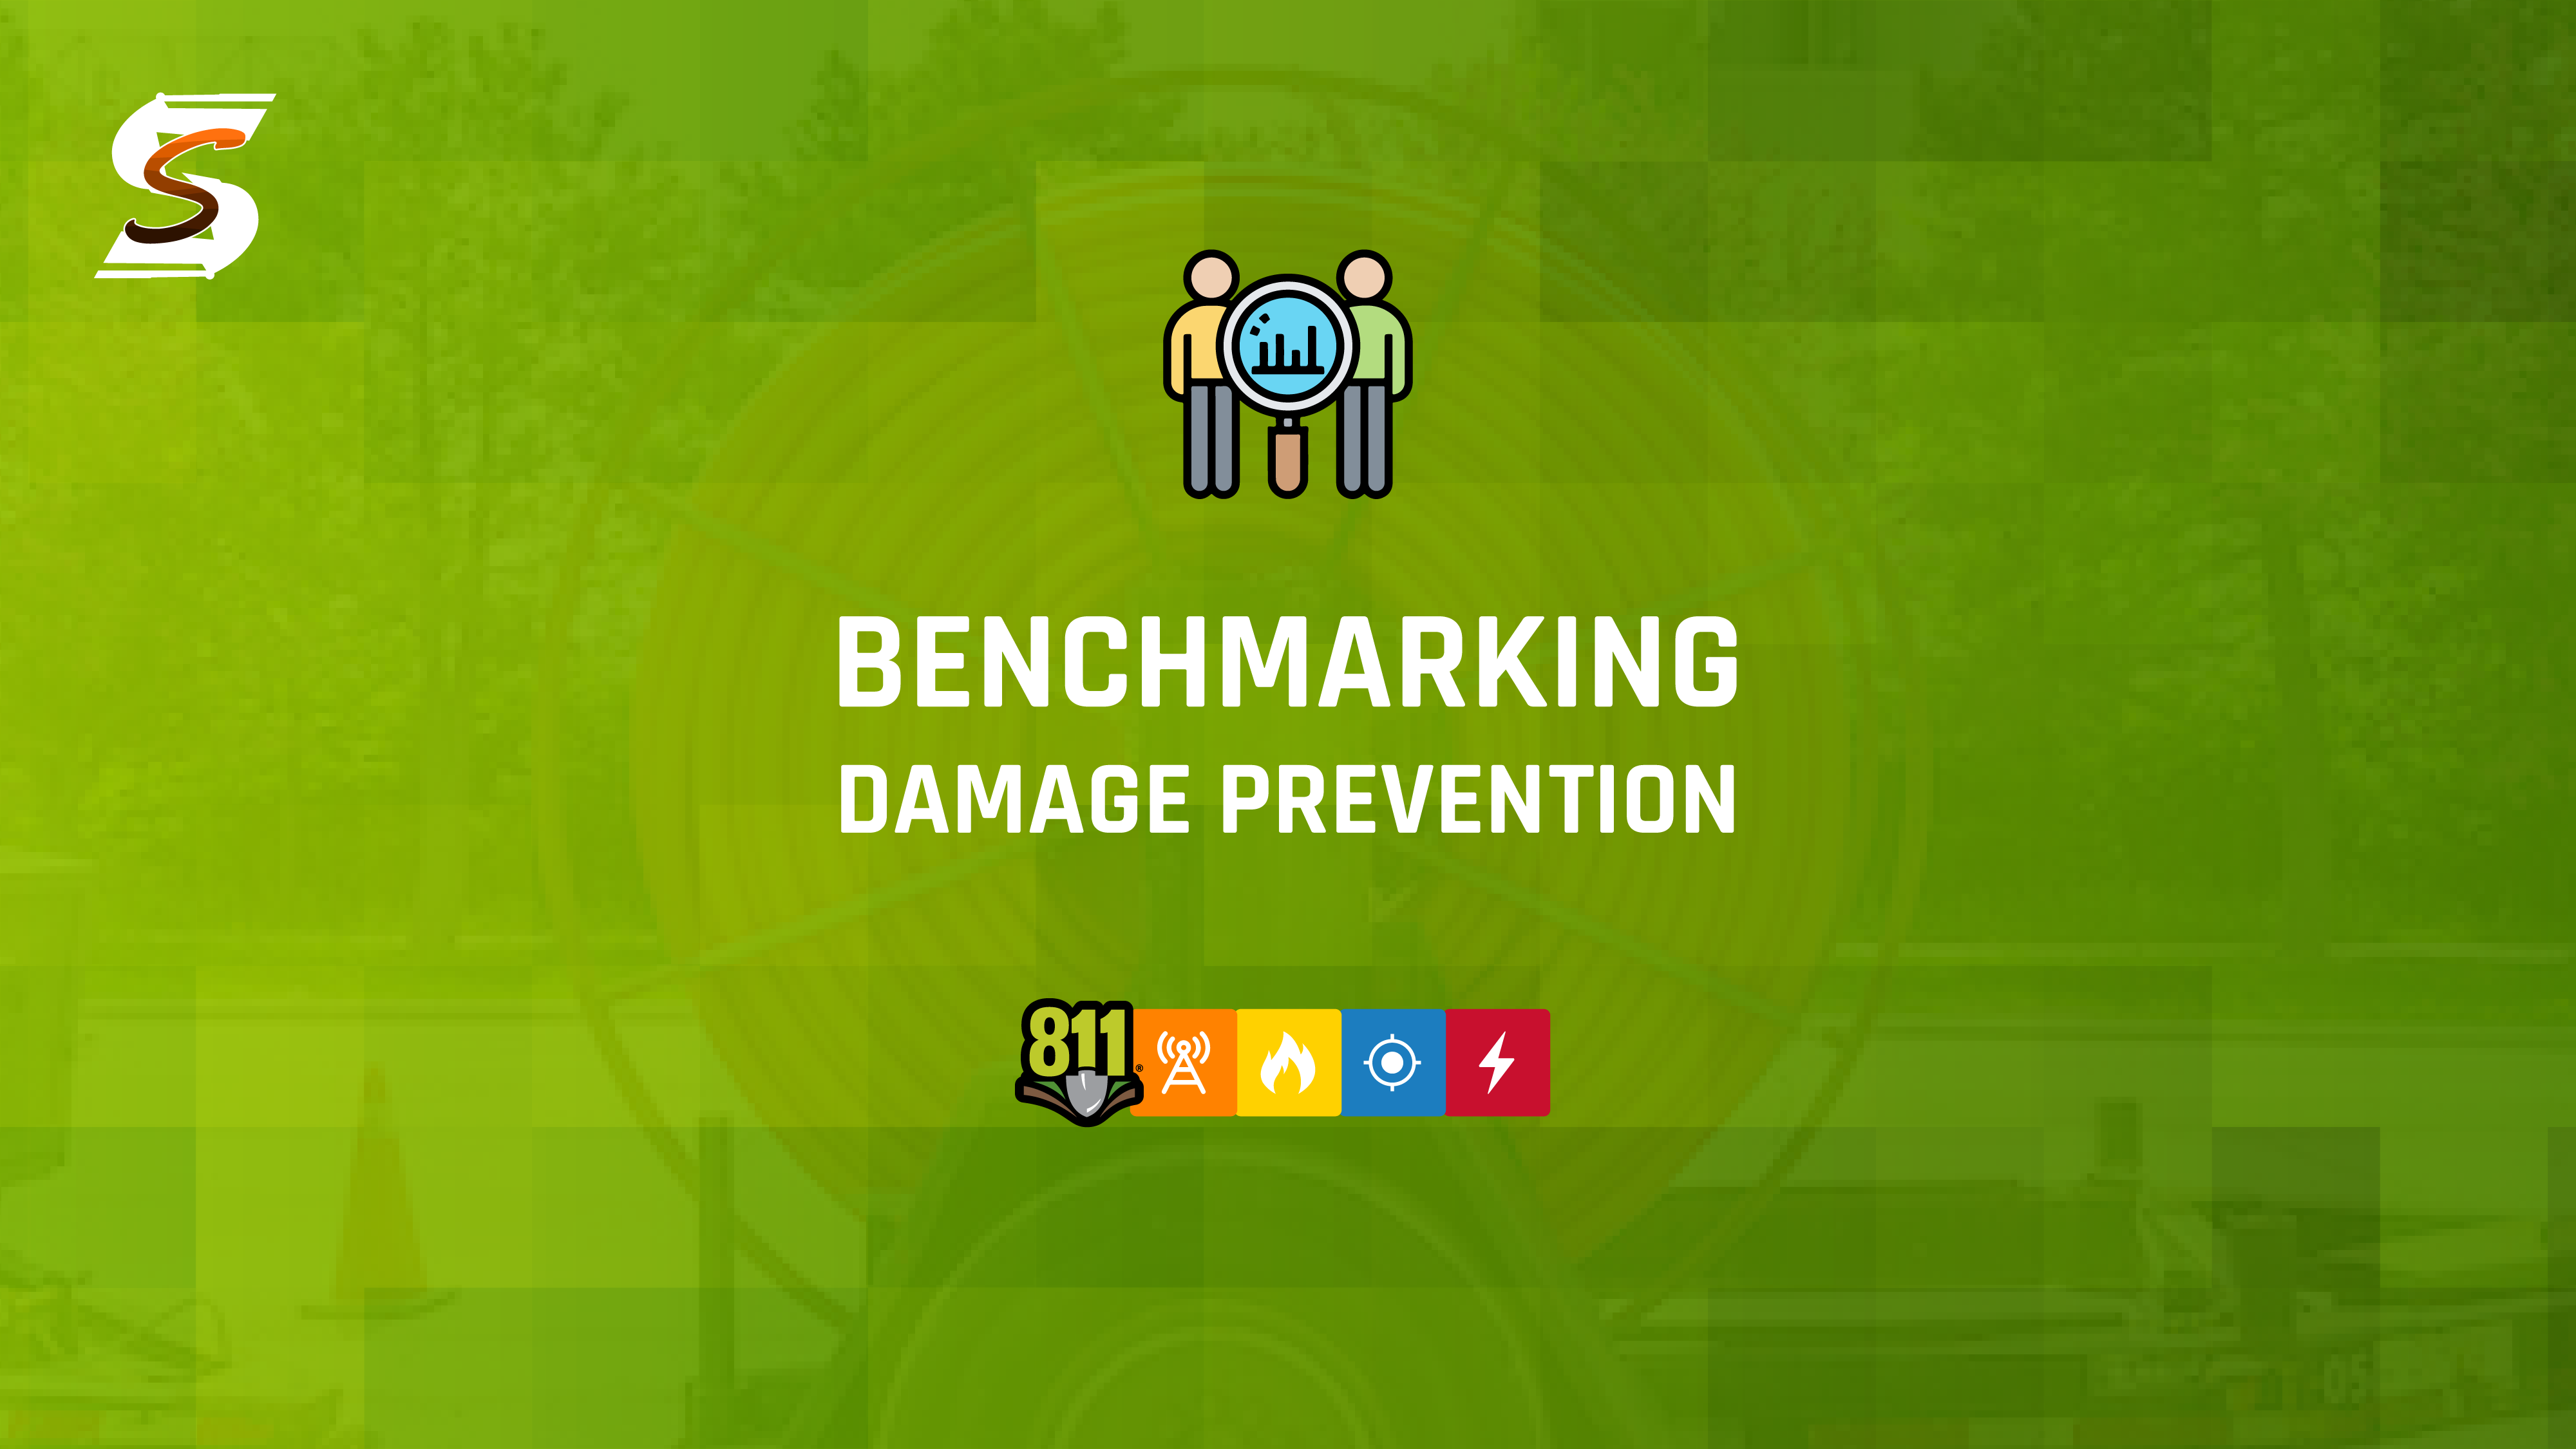 Featured image for “BENCHMARKING DAMAGE PREVENTION”